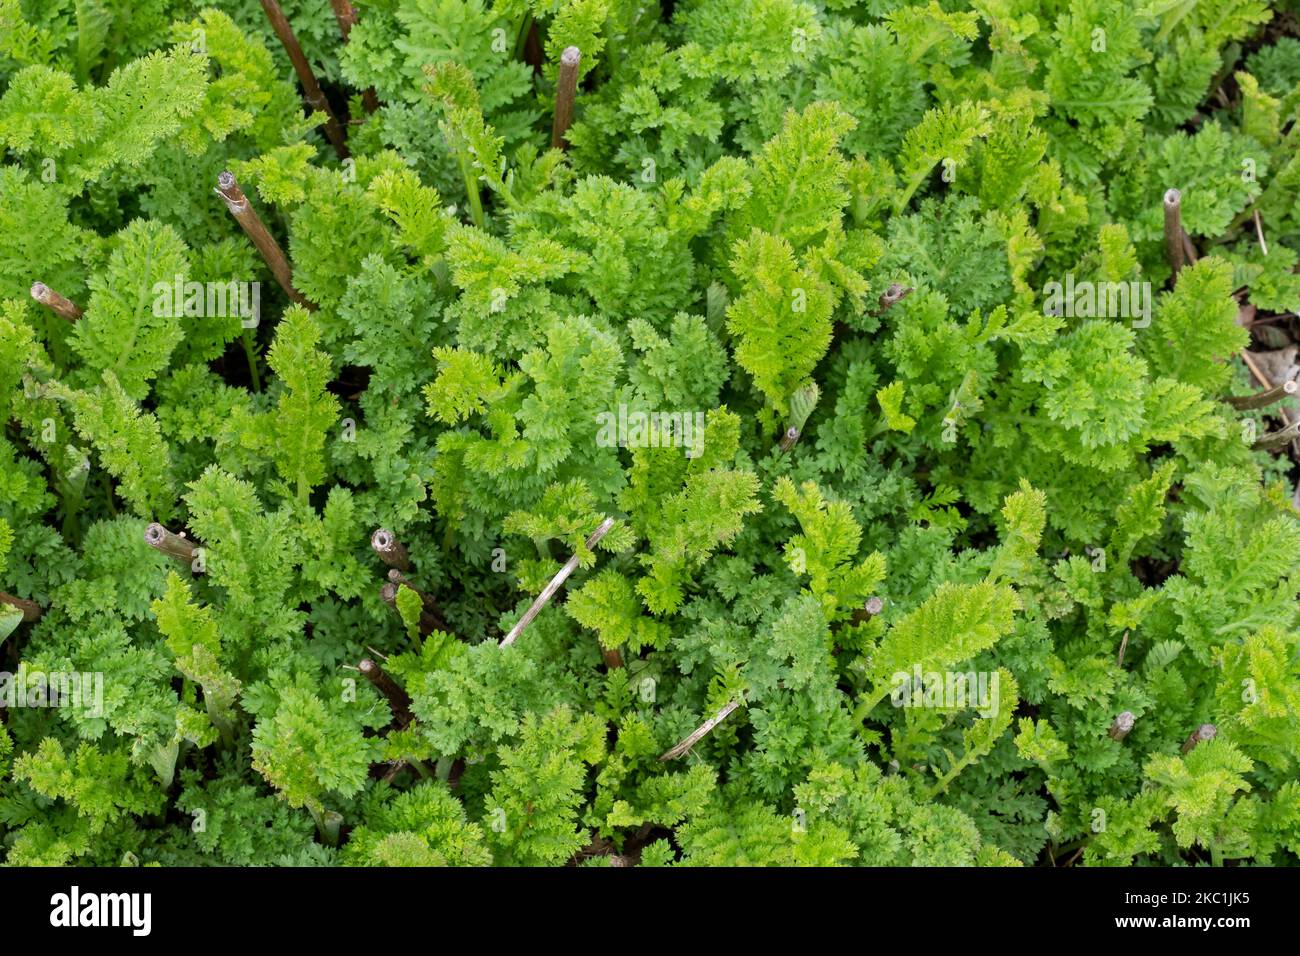 Leaf the medicinal plant of tansy, Tanacetum vulgare Stock Photo